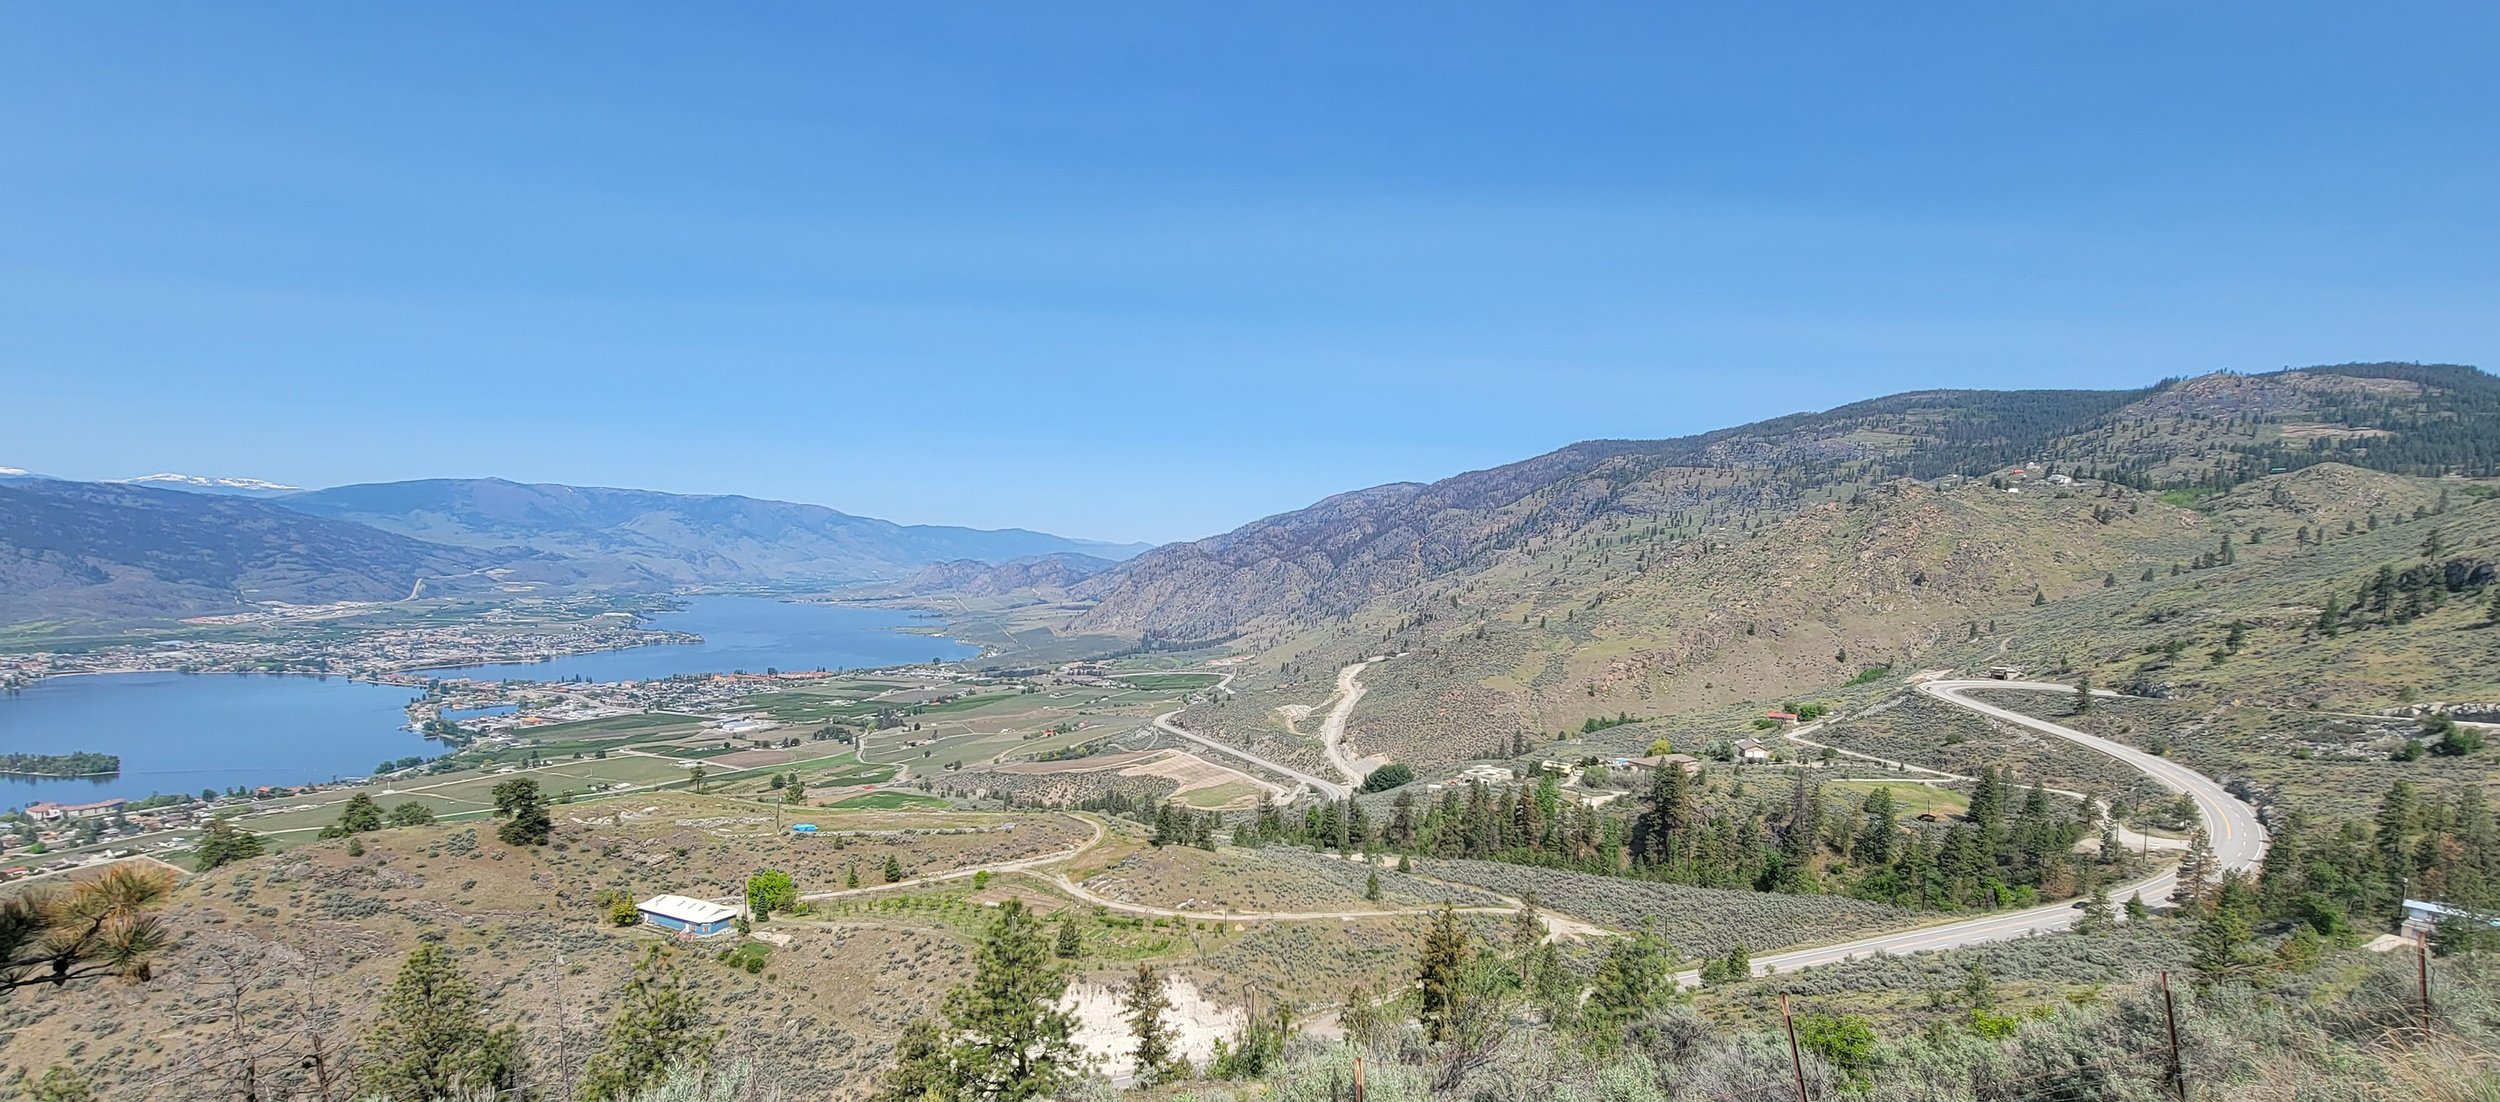 View halfway up from Anarchist pass, as you leave Oliver/Osoyoos area. One of the best views in the valley.